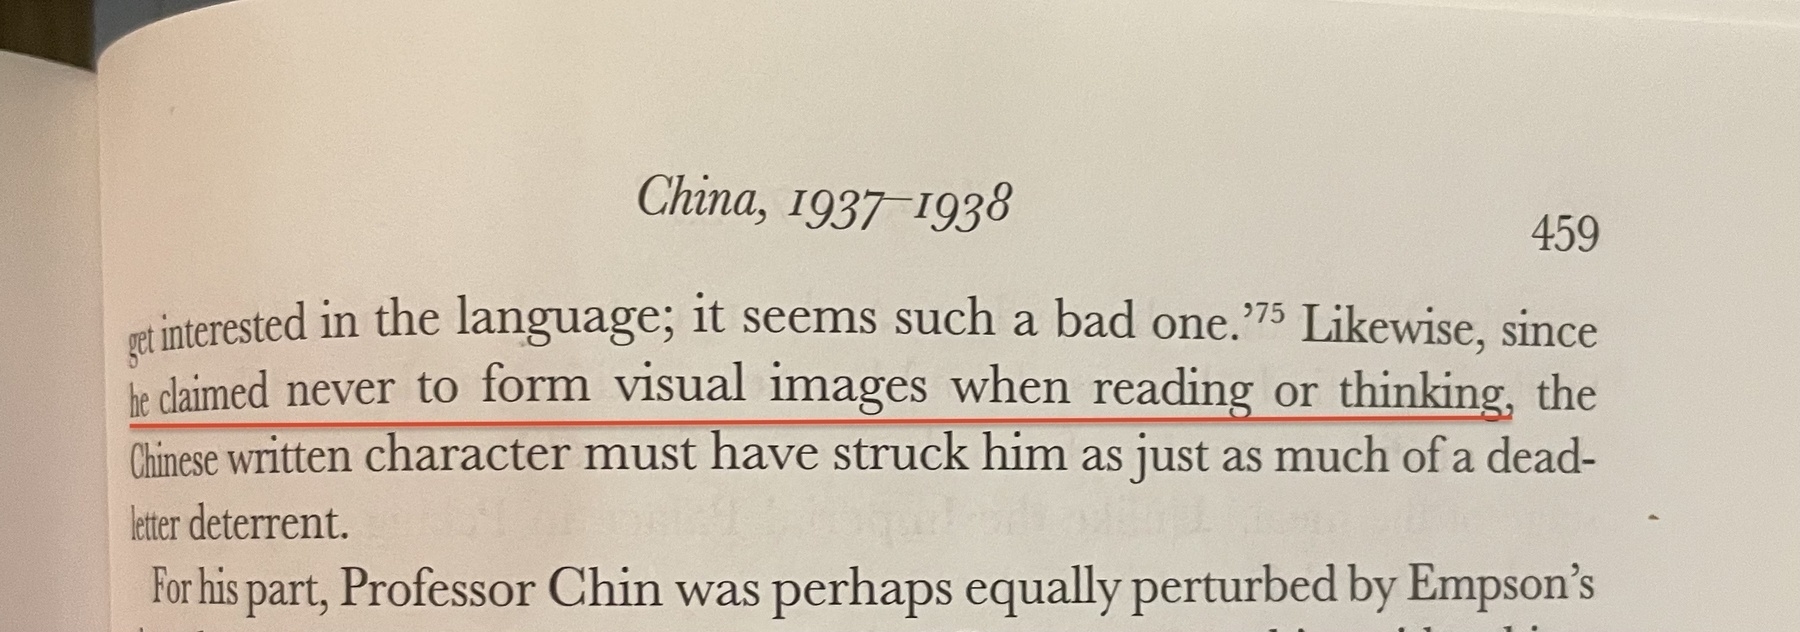 Empson claimed never to form visual images when reading or thinking